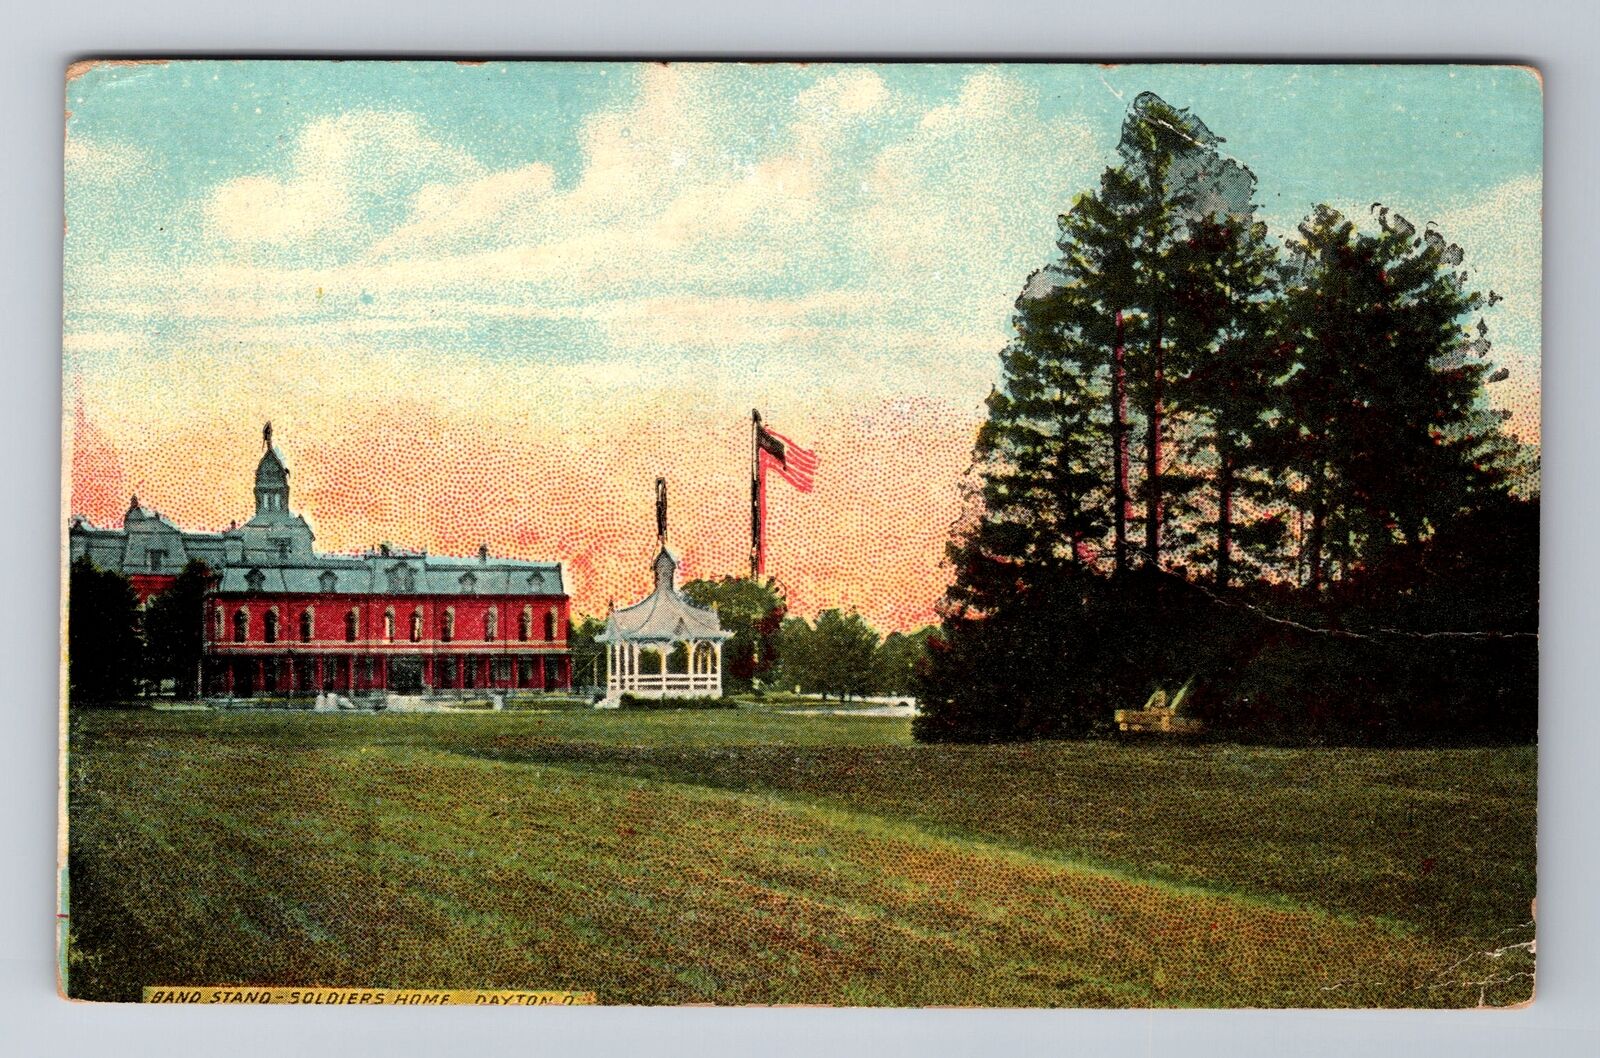 Dayton OH-Ohio, Band Stand, Soldiers Home, Antique, Vintage Postcard